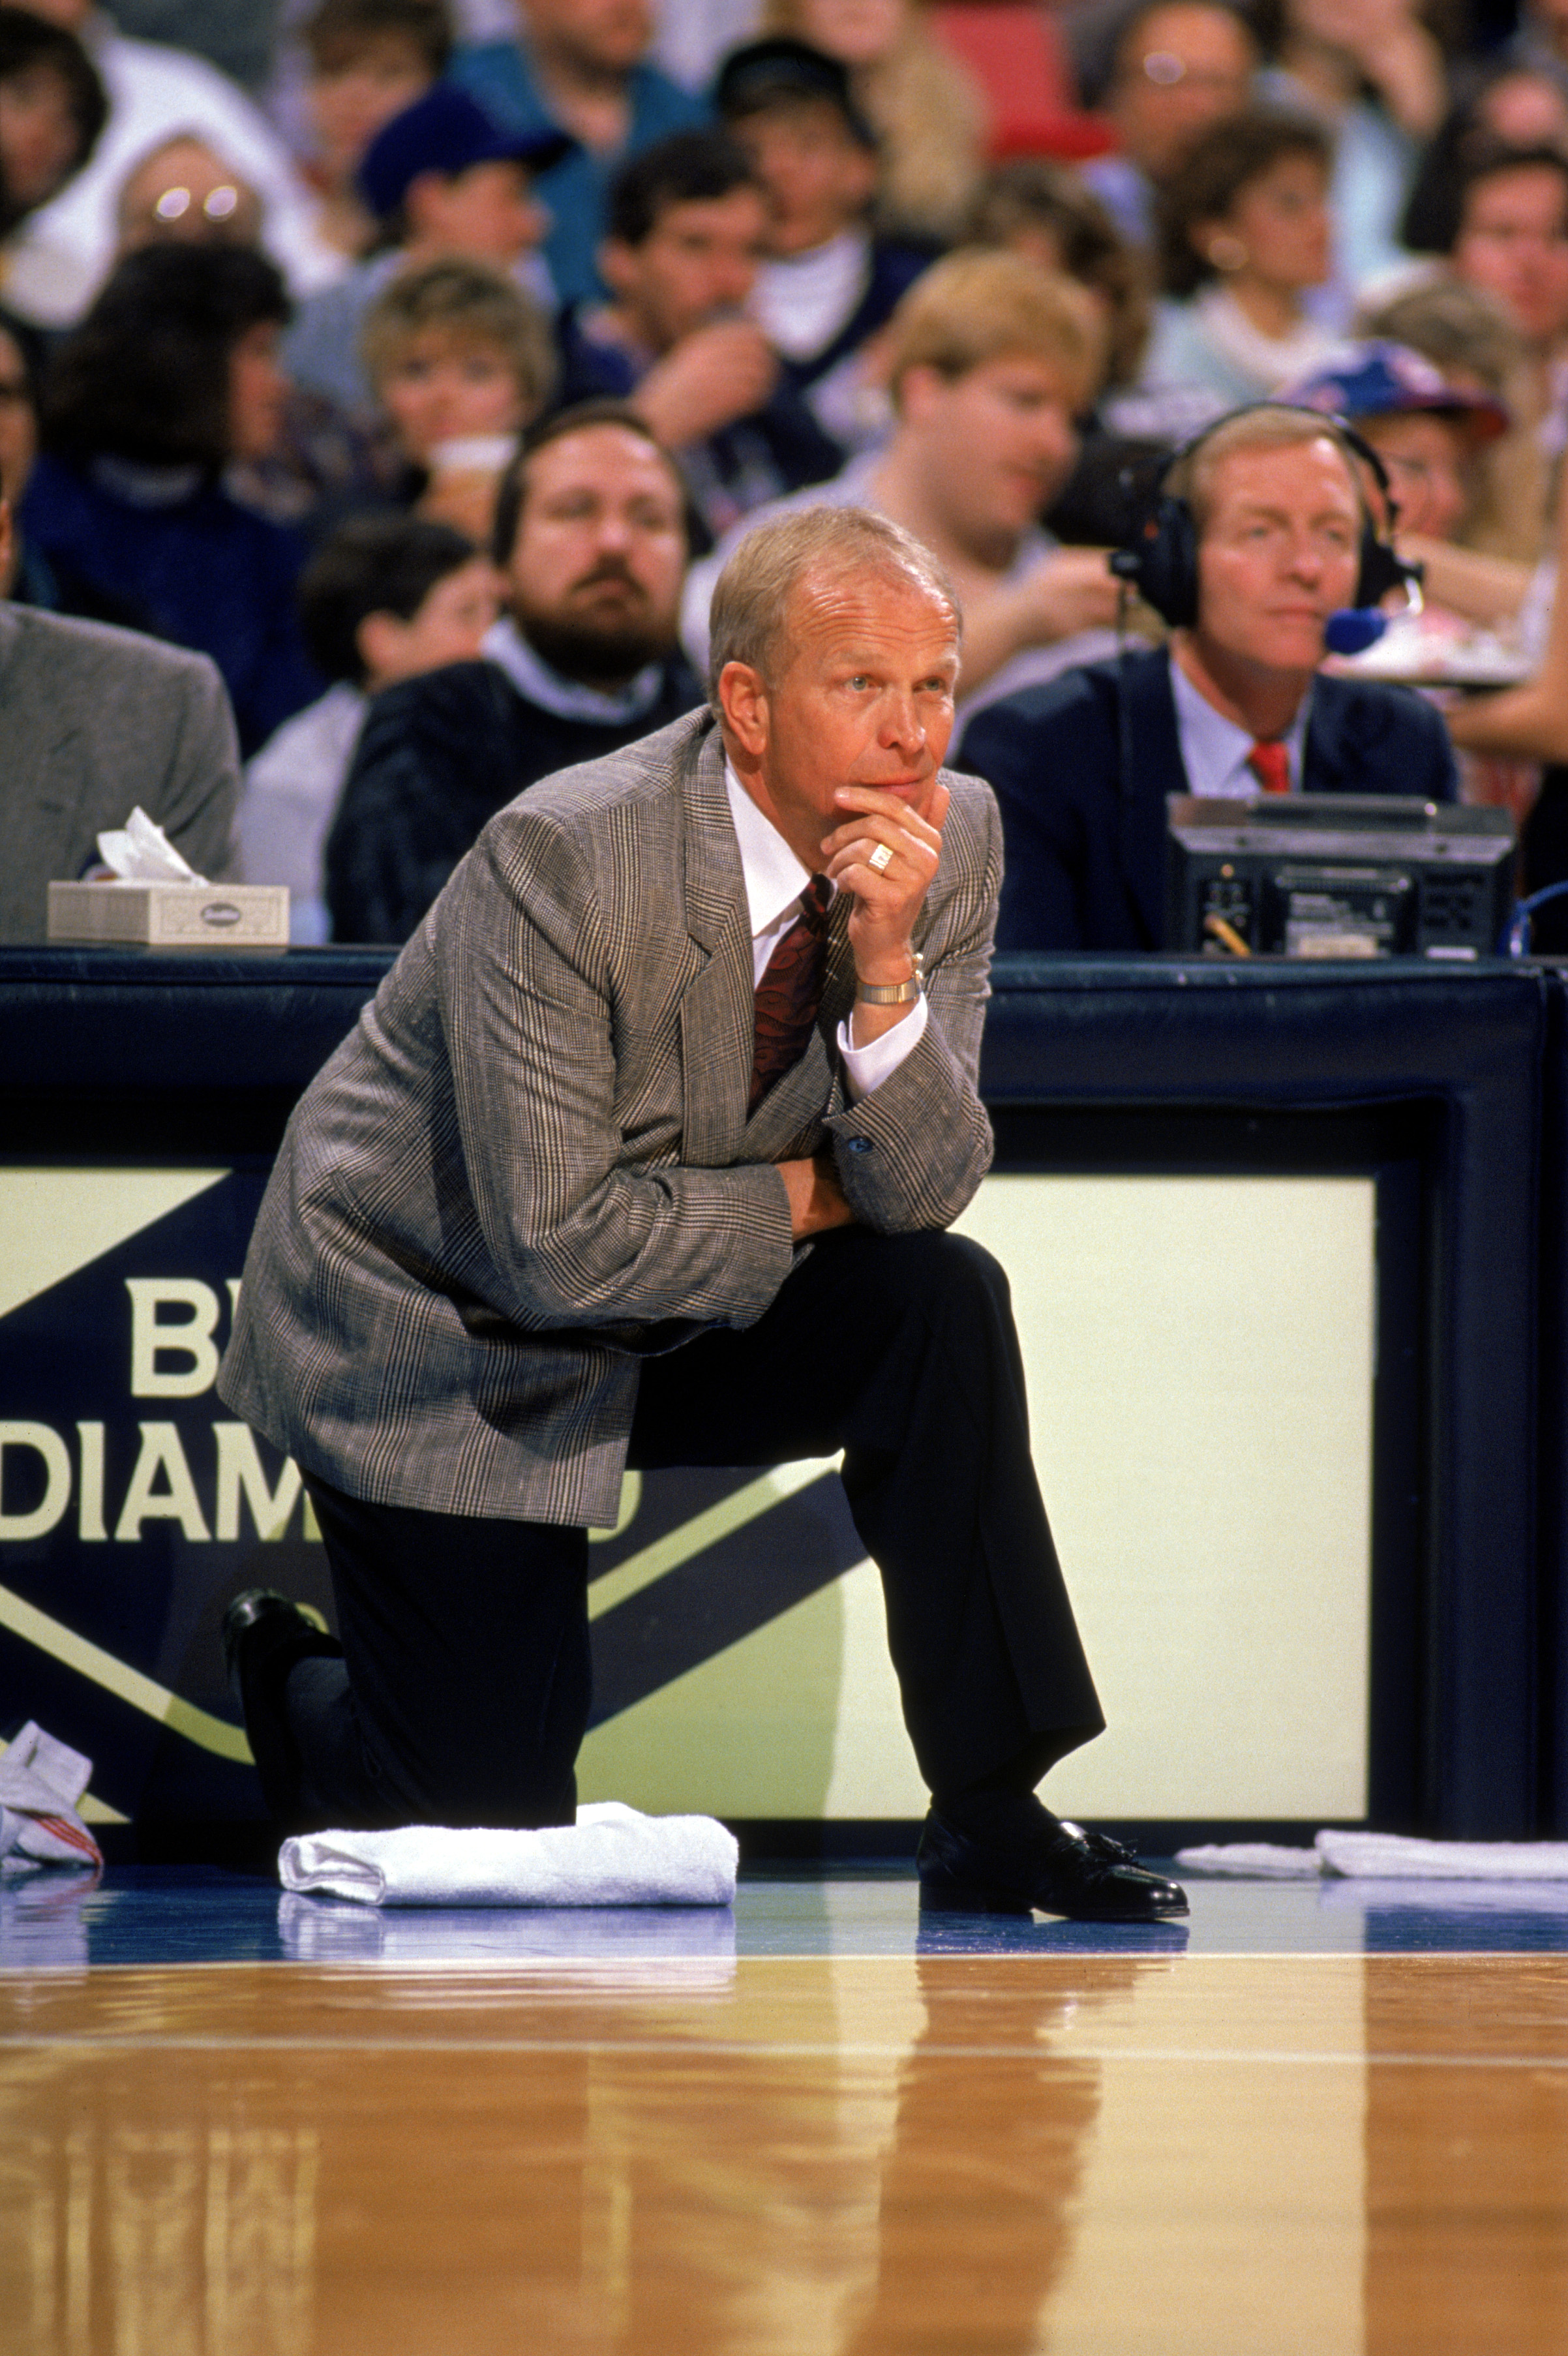 PHOENIX - 1989:  Head Coach Cotton Fitzsimmons of the Phoenix Suns looks on during a 1989 season NBA game at Veteran's Memorial Coliseum in Phoenix, Arizona.  (Photo by Otto Greule Jr/Getty Images)